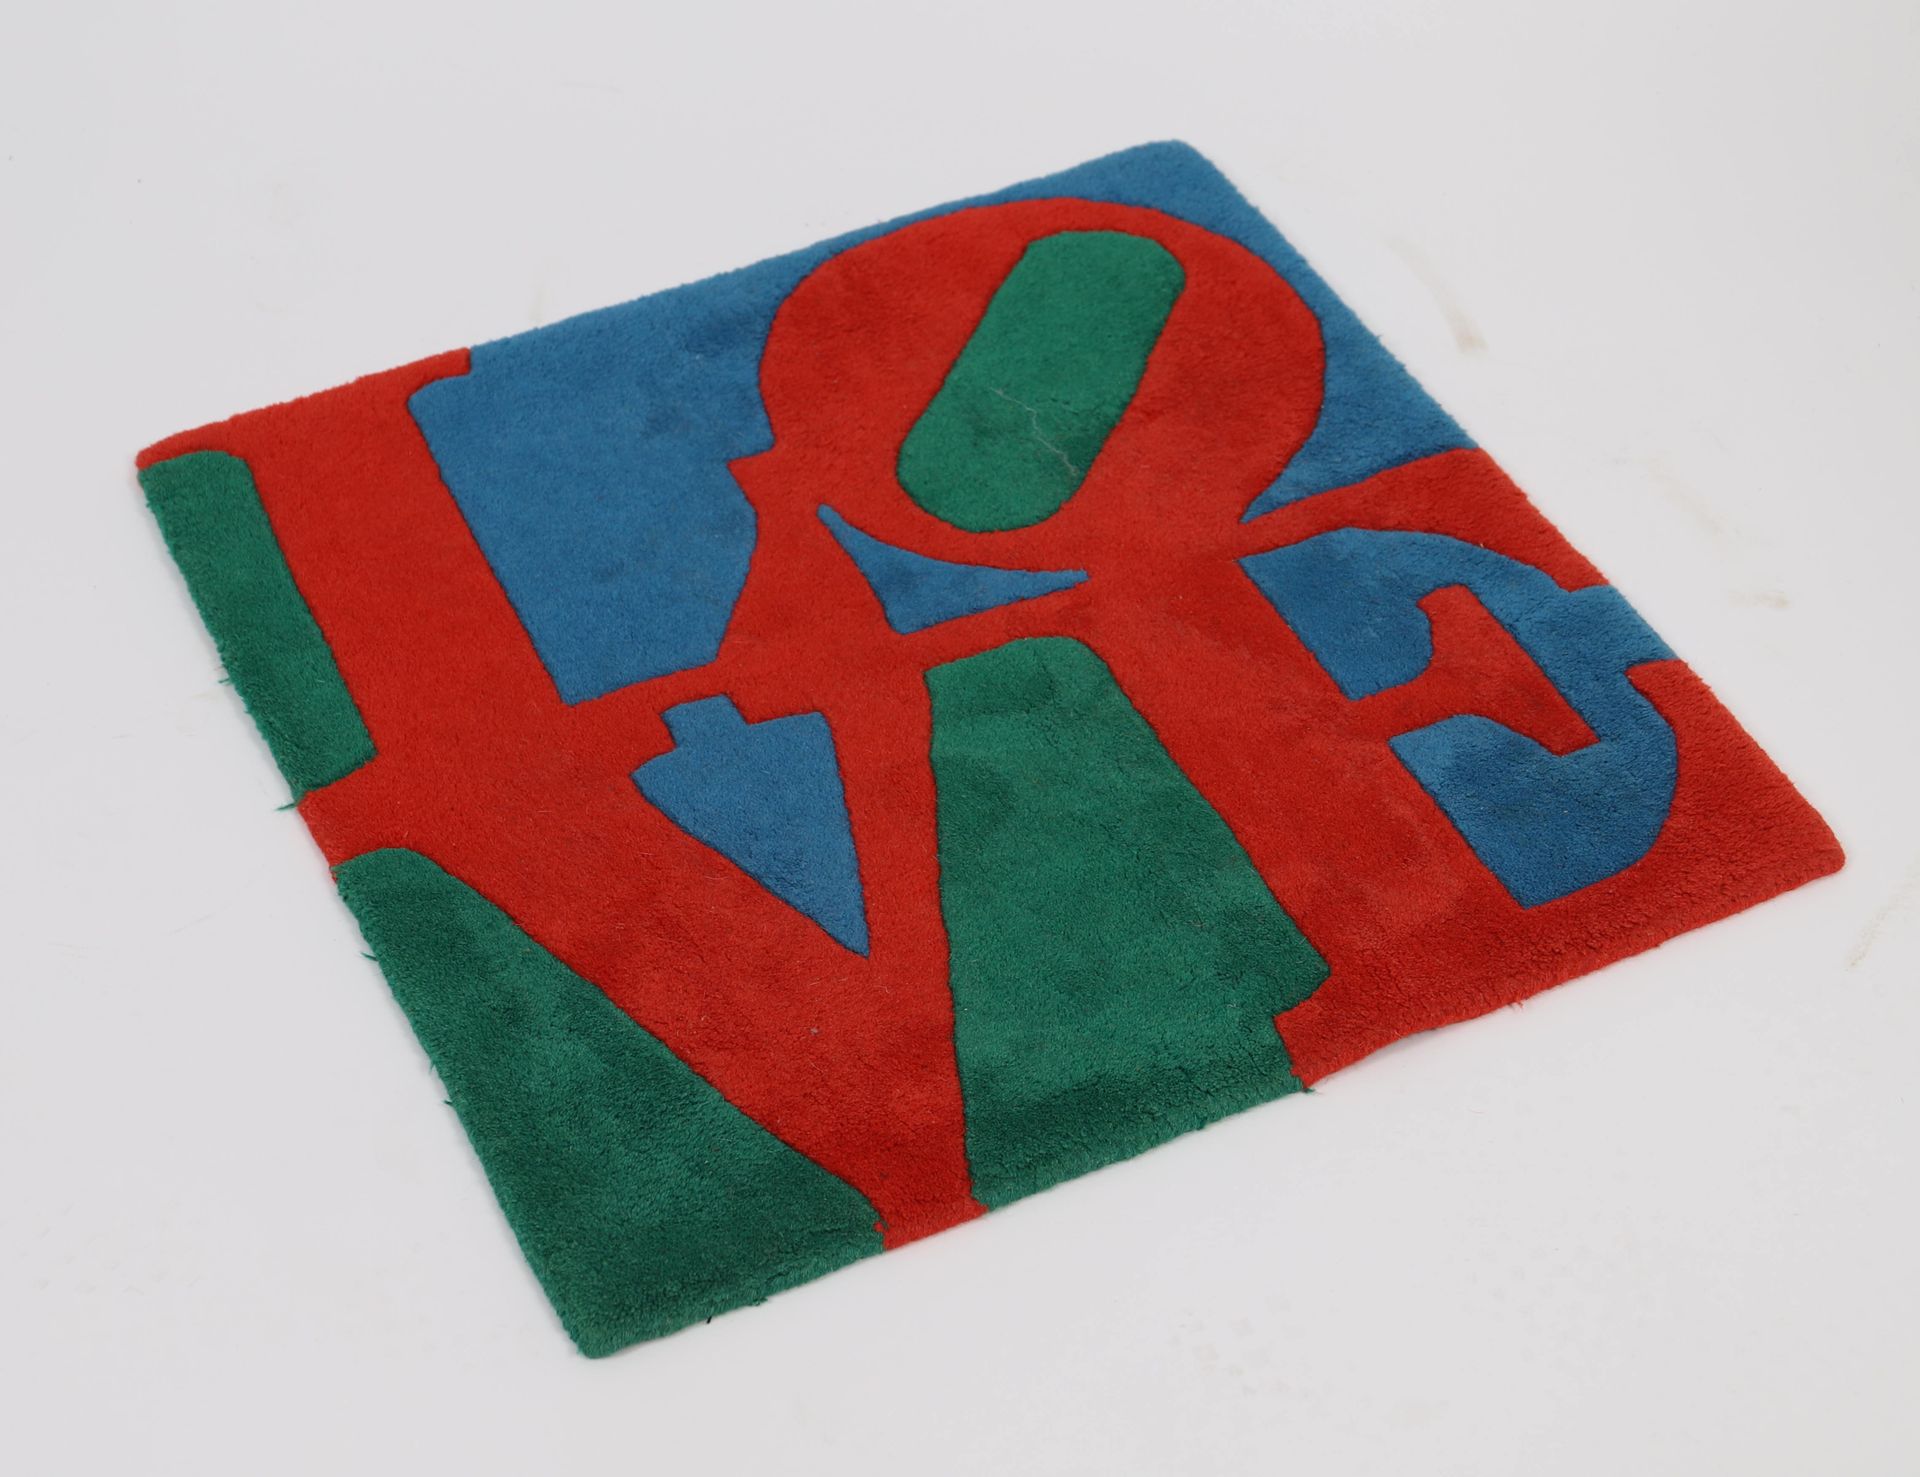 Null After Robert Indiana - "Love" carpet 1964

Numbered 588/10000

Edition 2007&hellip;